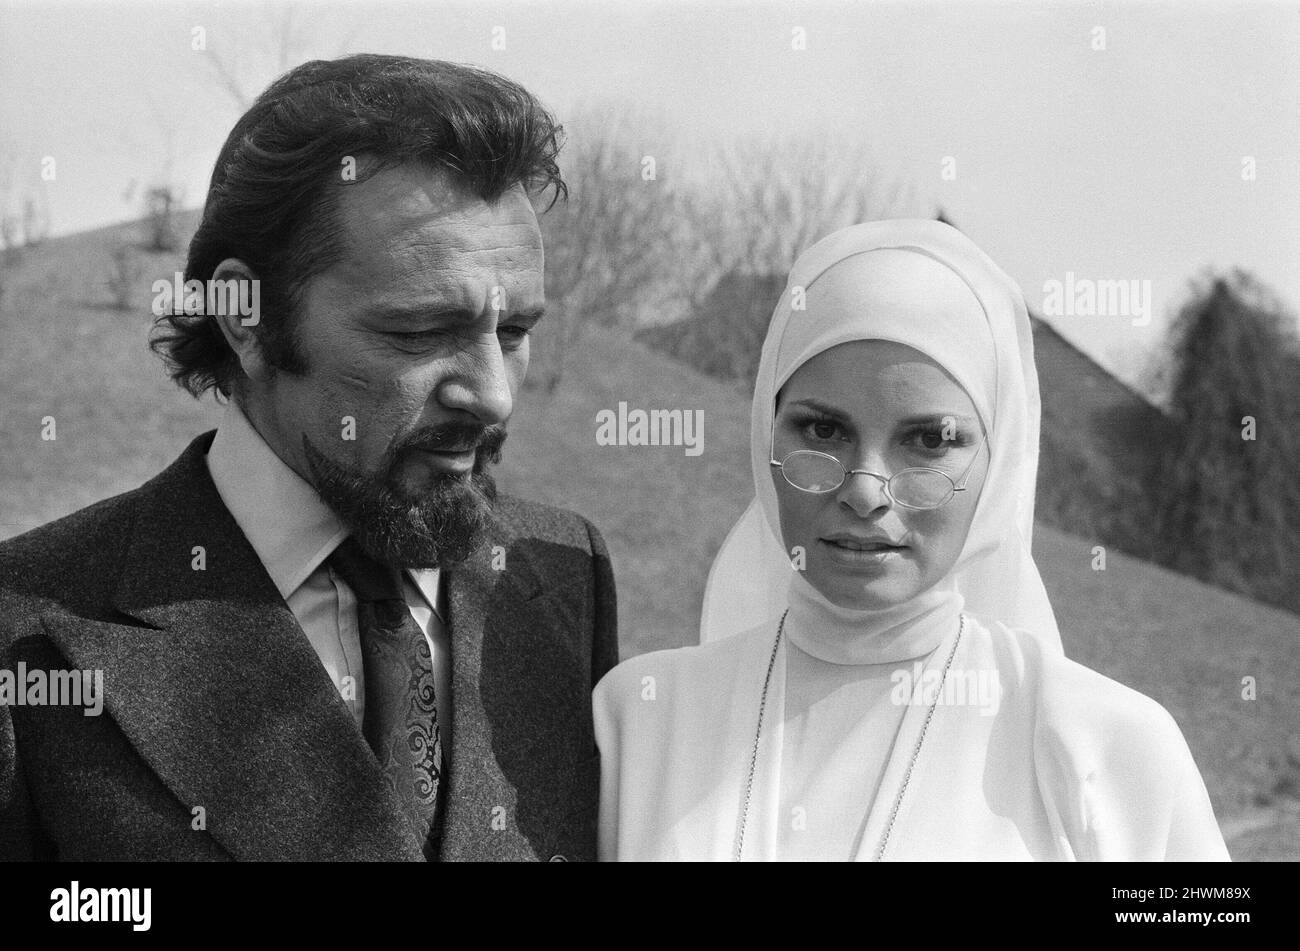 Raquel Welch pictured on set, in Hungary filming her new movie 'Bluebeard'.  Ms Welch plays Sister Magdalena, a novice nun.   The film also stars Richard Burton, pictured here onset with Raquel Welch  Bluebeard is a 1972 film directed by Edward Dmytryk. It stars Richard Burton, Raquel Welch, Joey Heatherton and Sybil Danning. Set in Austria in the 1930s, Bluebeard is a World War I pilot with a reputation as a 'ladykiller' and a frightening blue tinged beard.   Picture taken 19th March 1972 Stock Photo